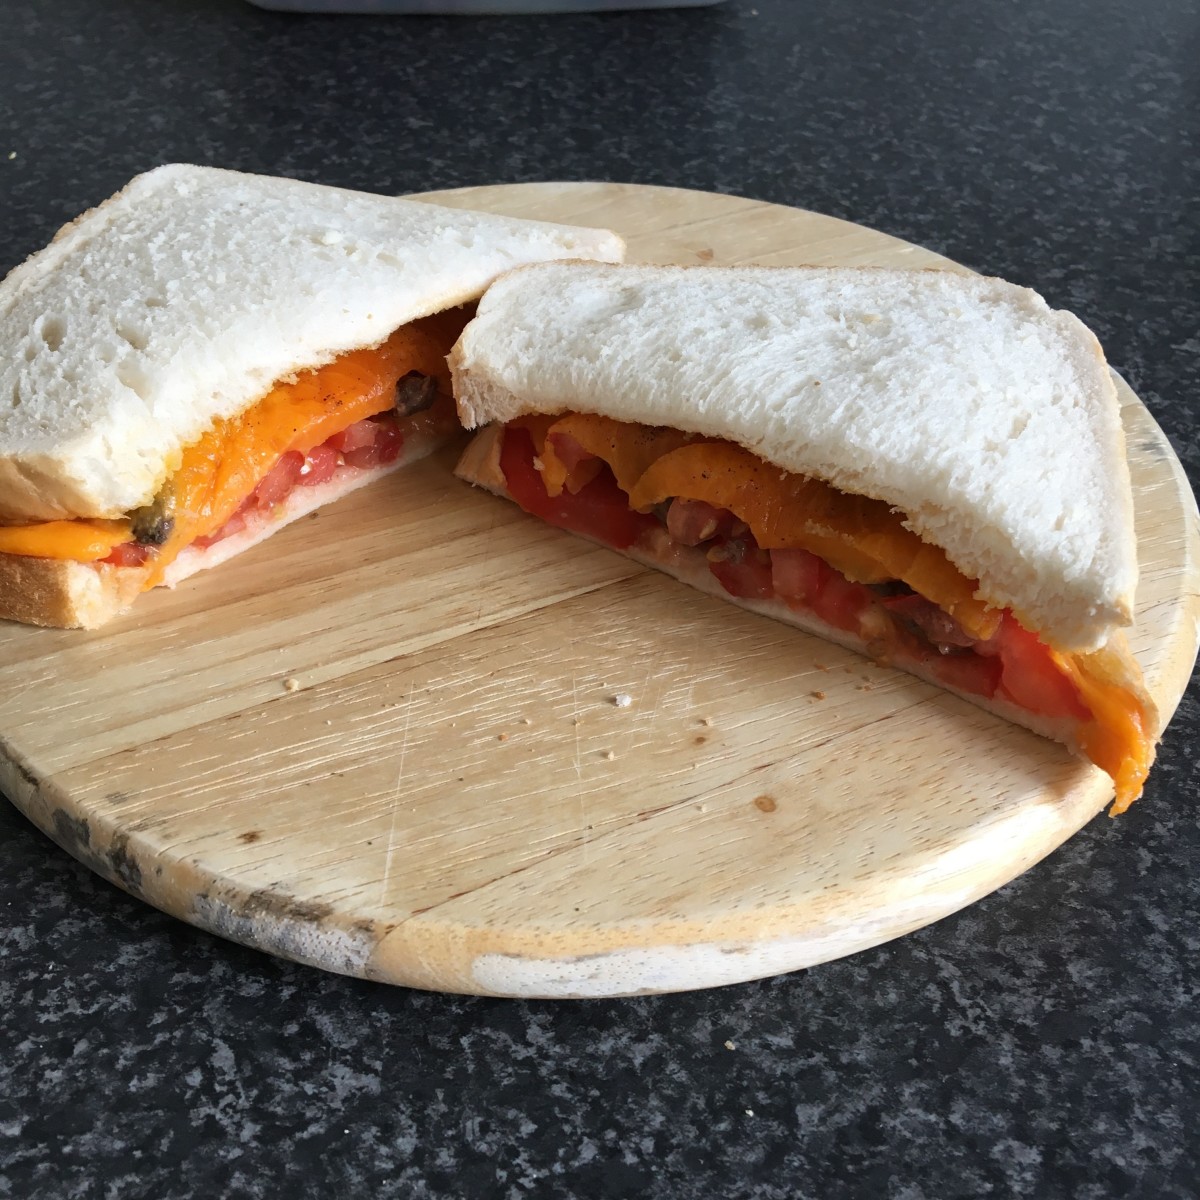 Wild goose breast, cheese and tomato sandwich